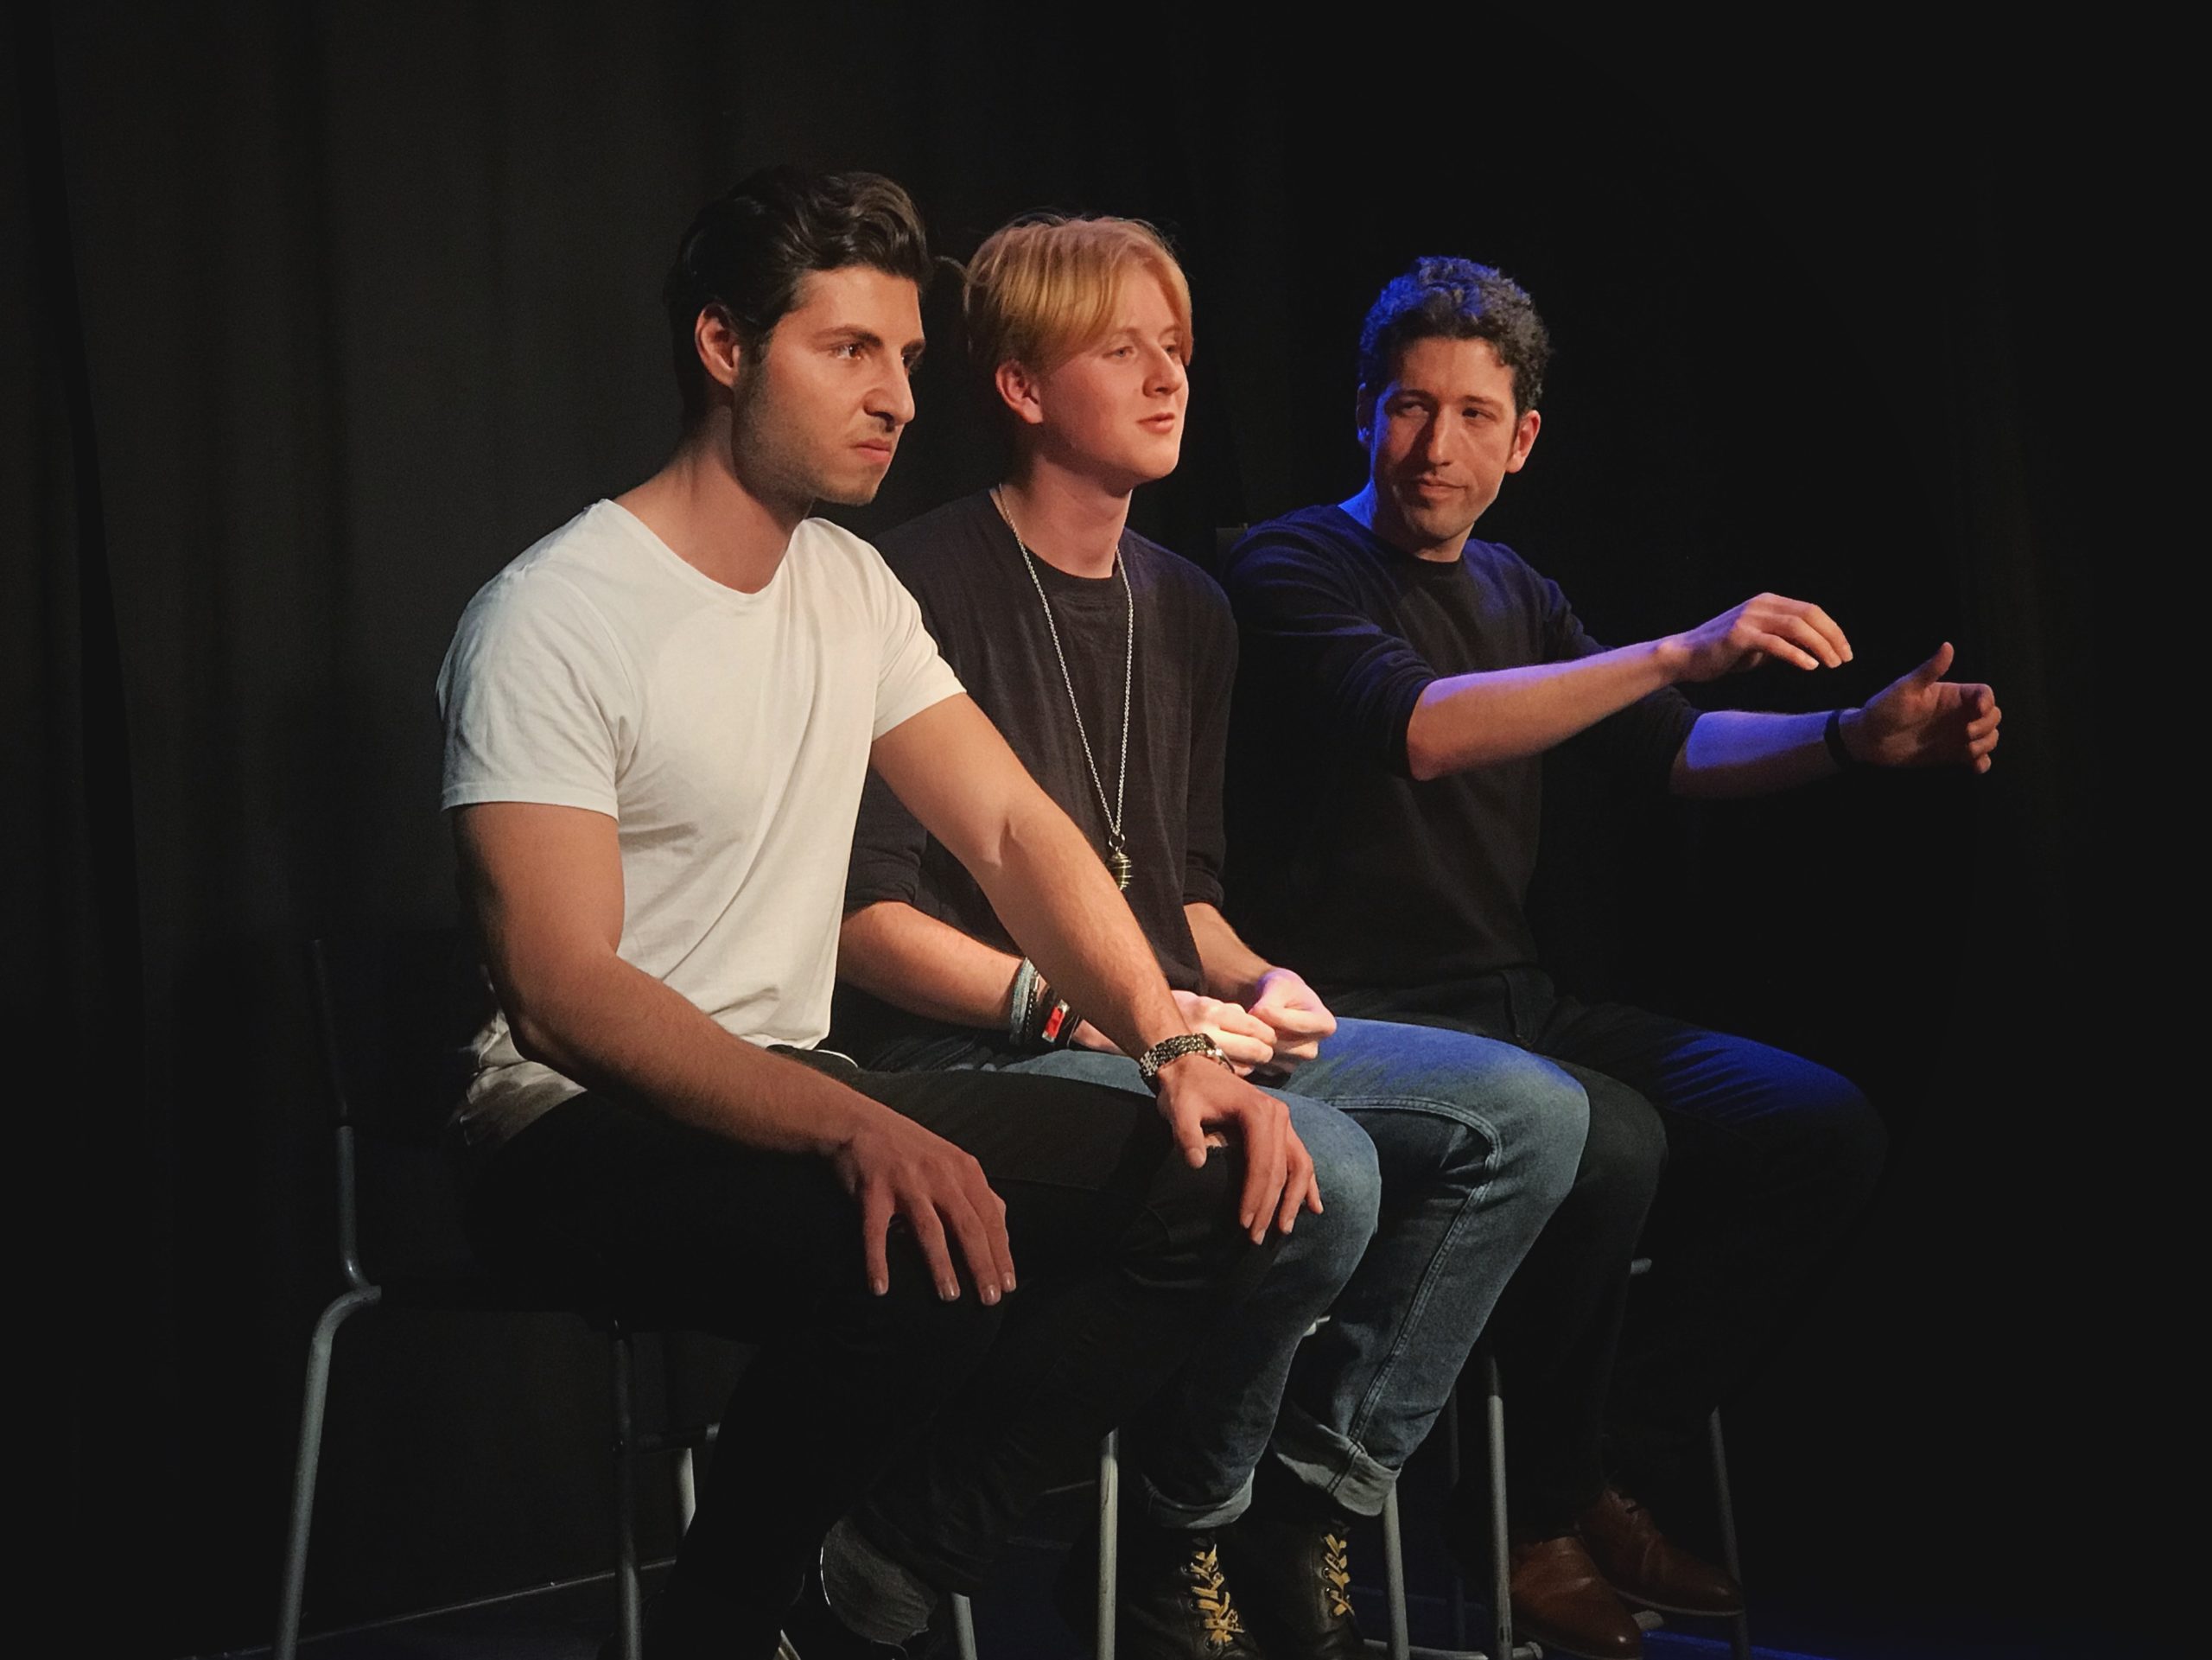 Act Attack's Pure improv show. Three men sit on bar stools. One of them pretends to drive